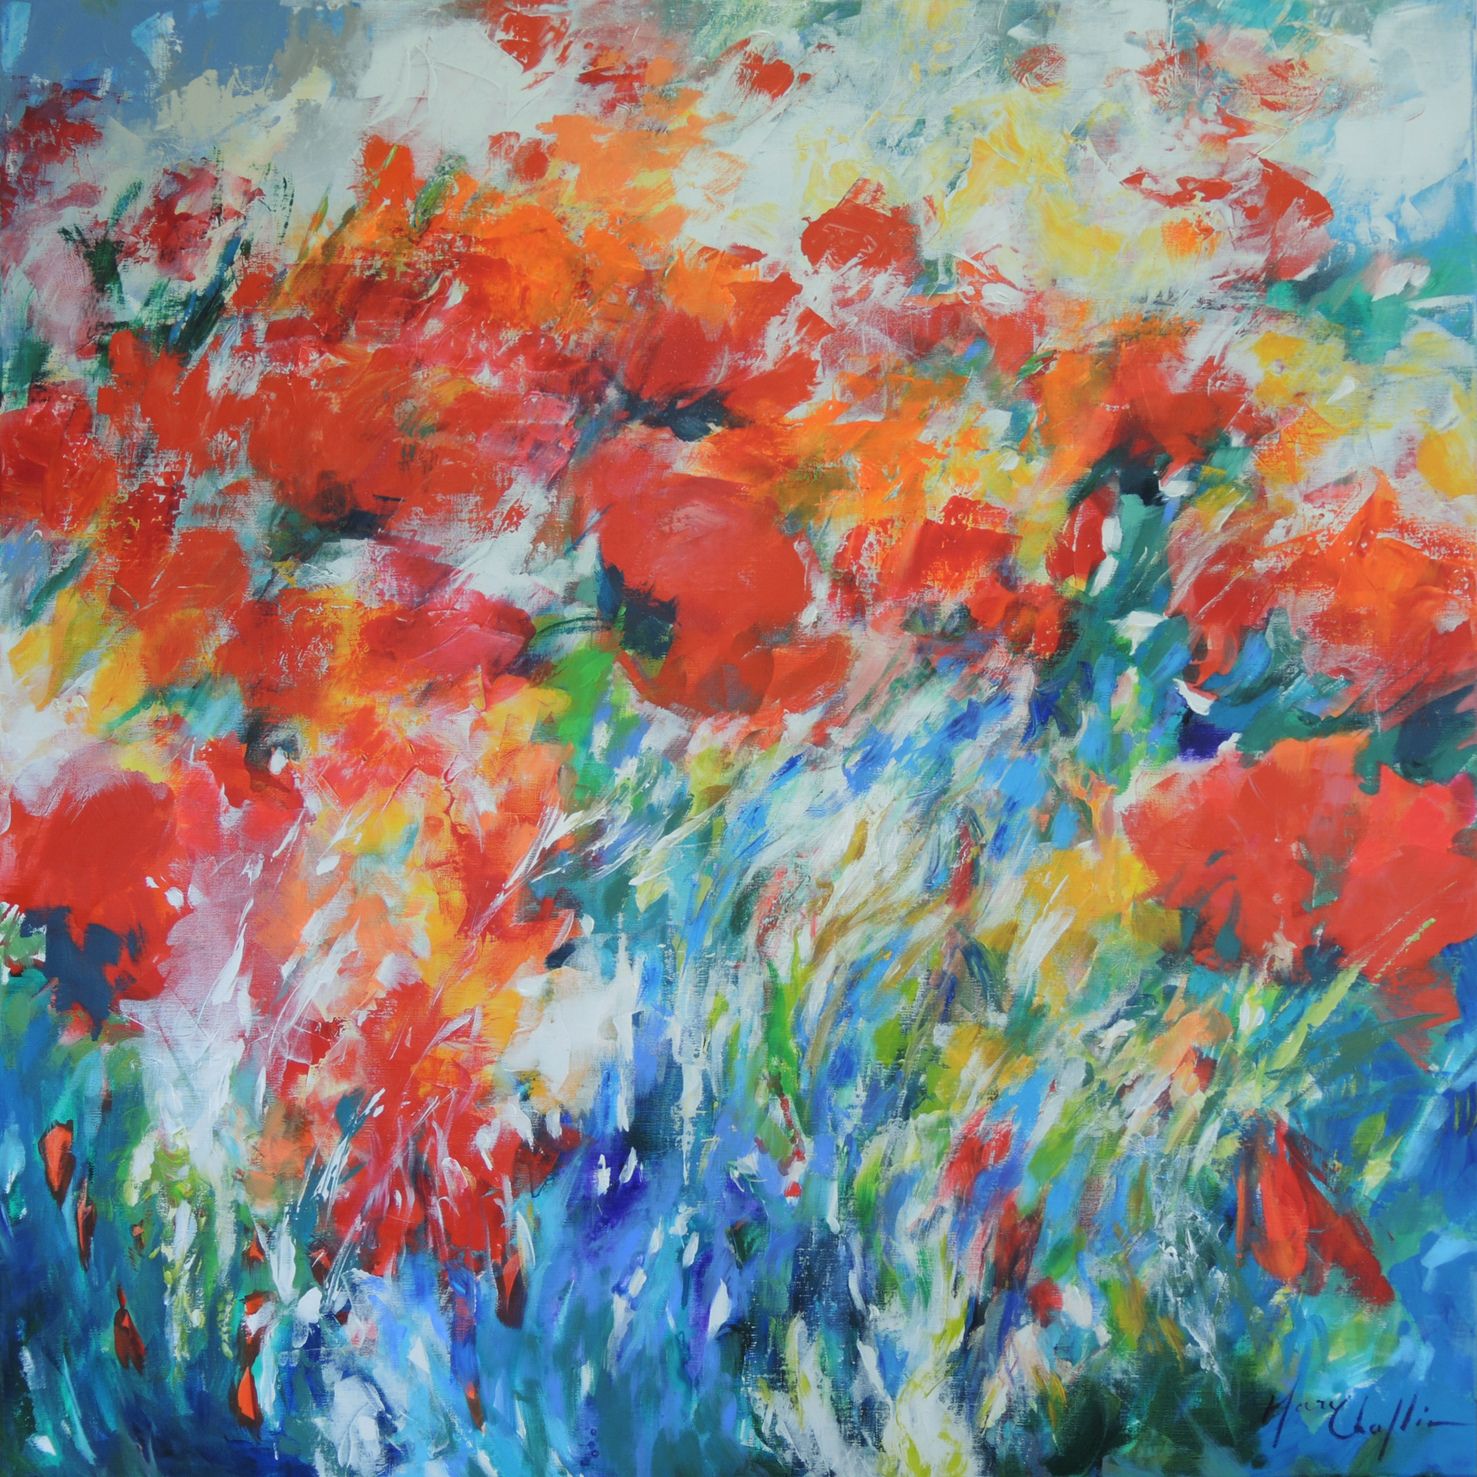 Oriental poppies in the summer wind by Mary Chaplin